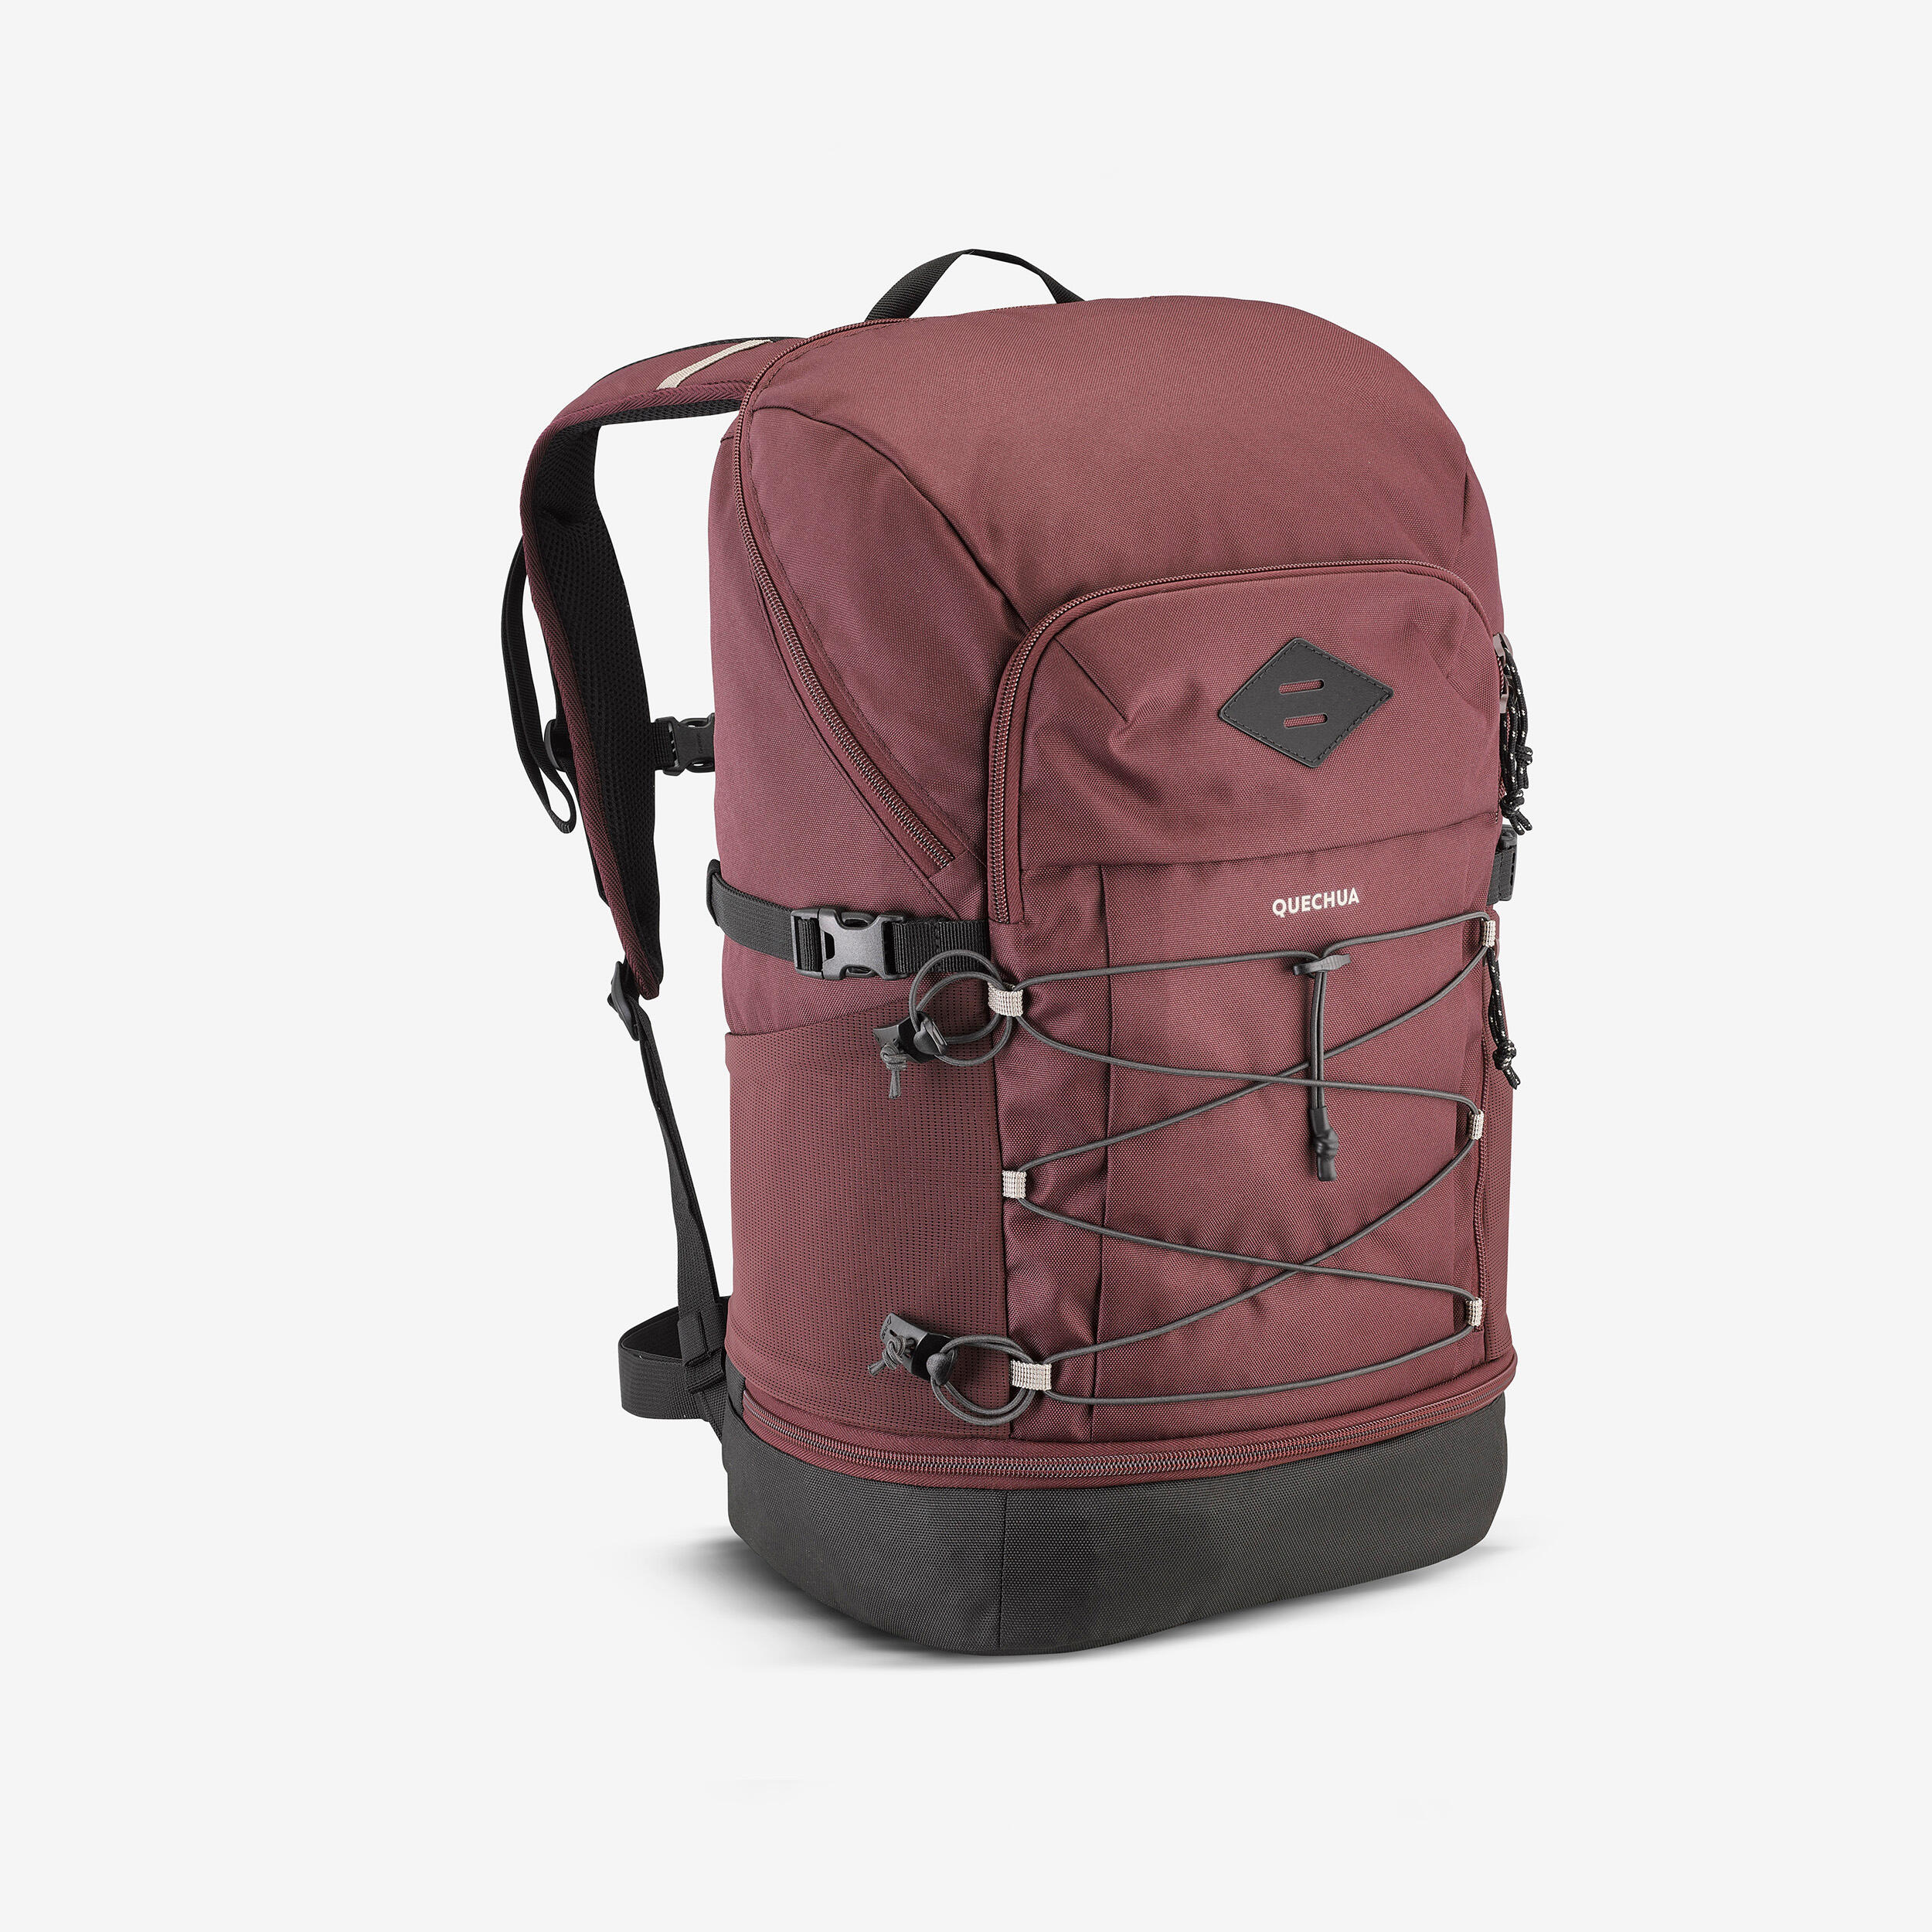 QUECHUA Hiking Backpack 30L, Men's Fashion, Bags, Backpacks on Carousell